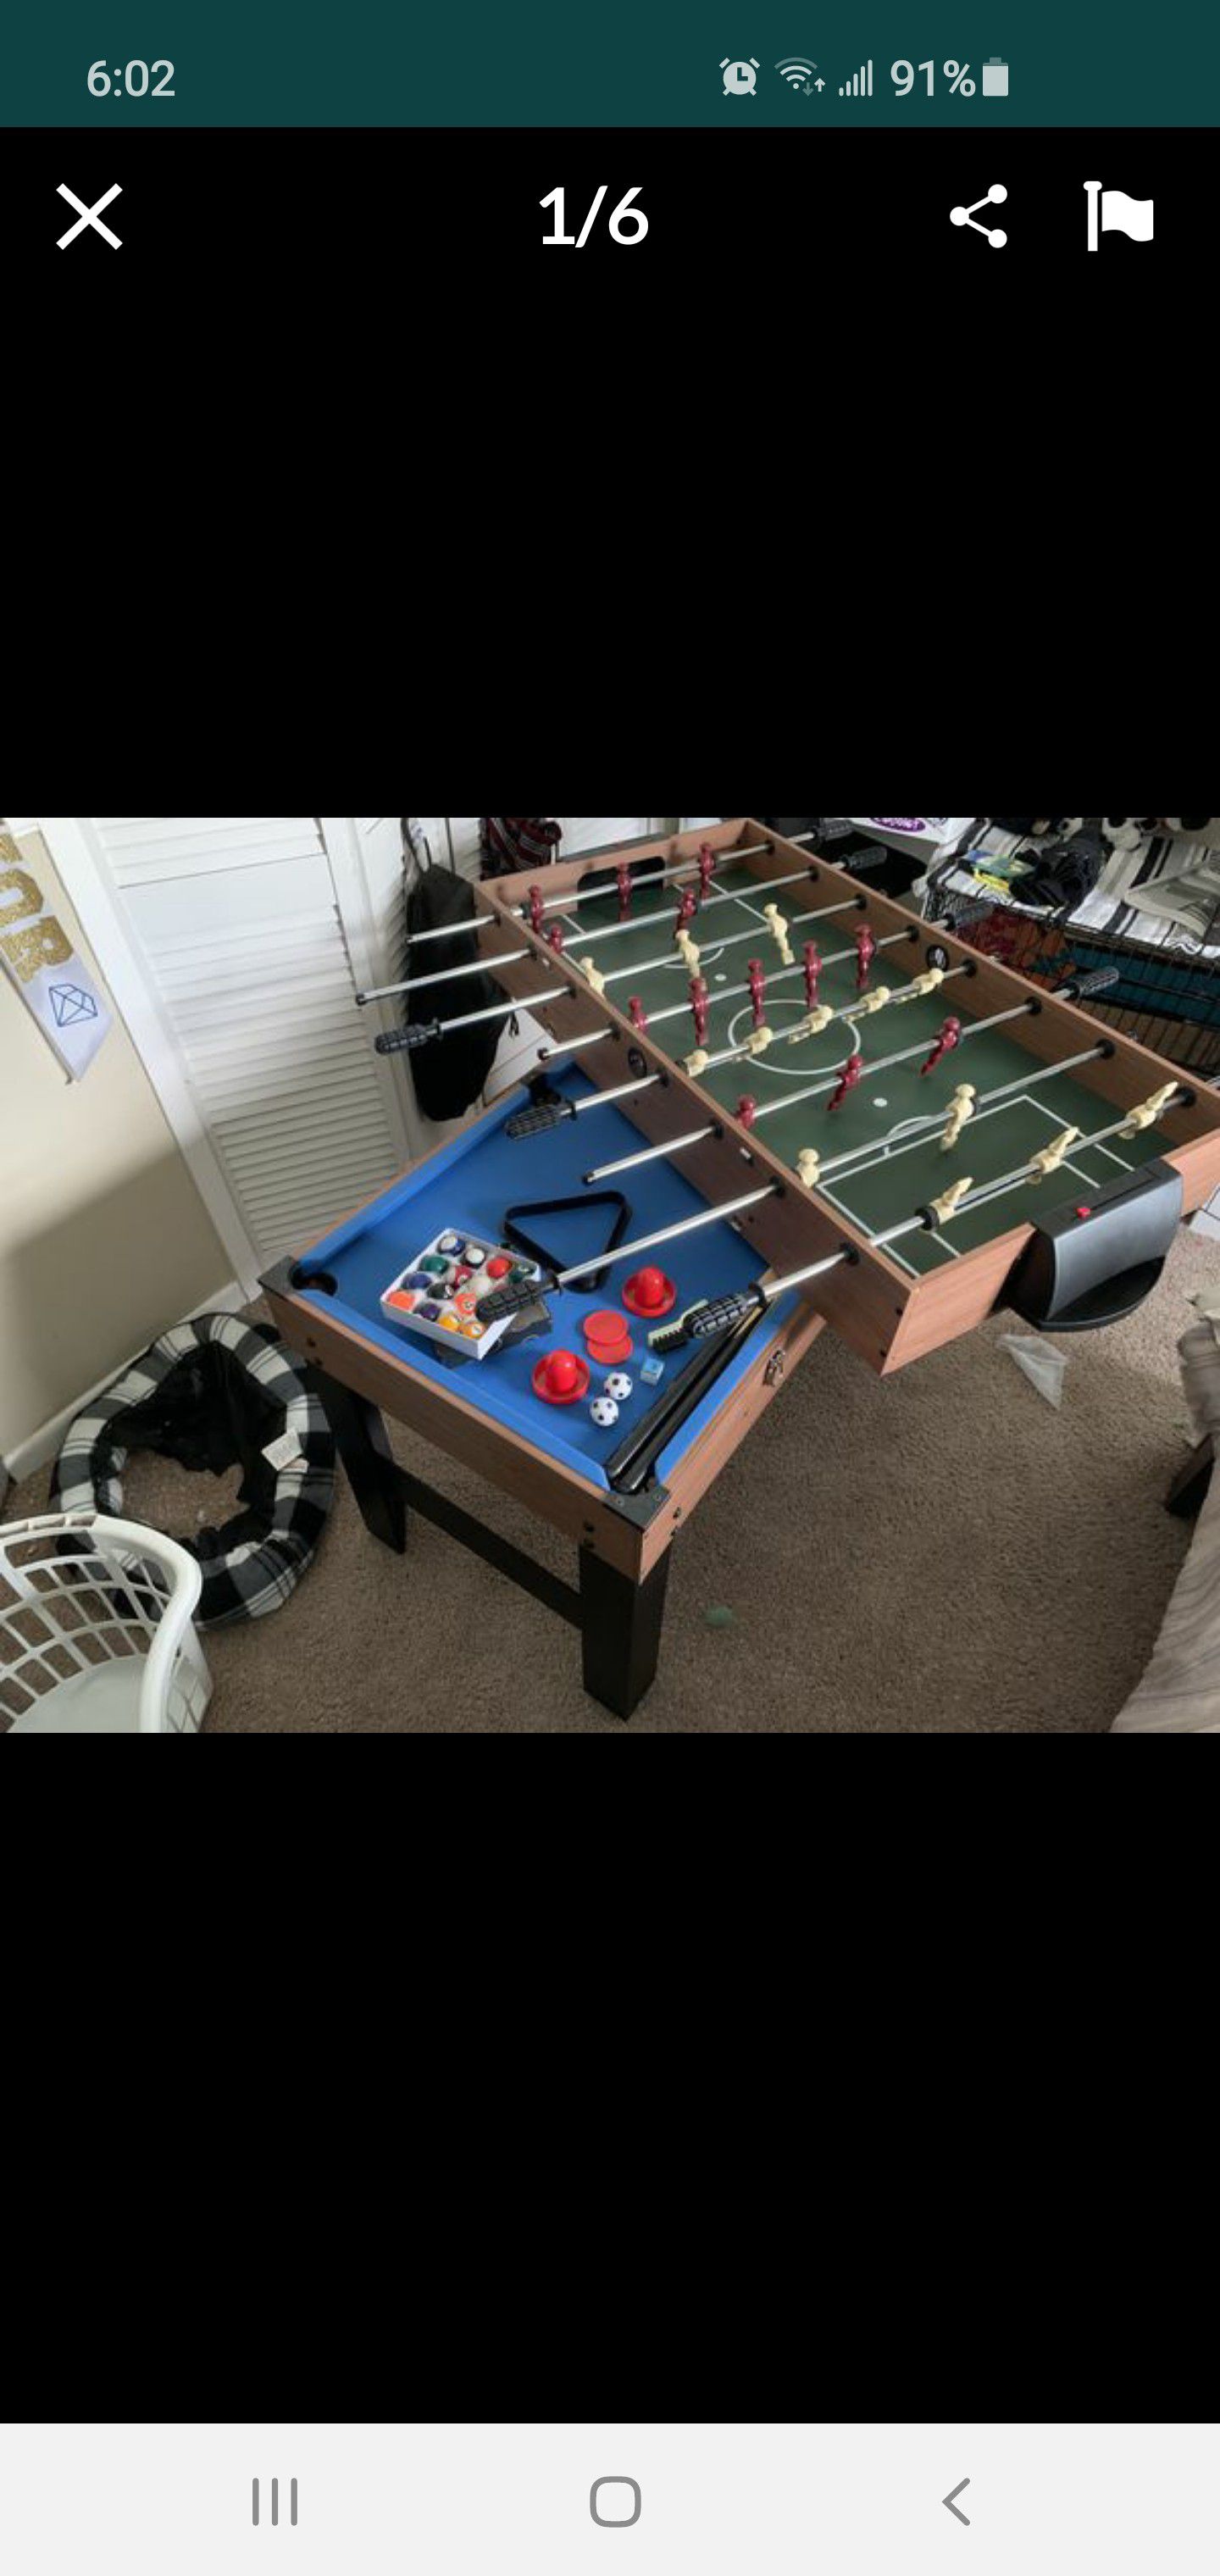 MDsport 48" 3 in 1 combo table for $150